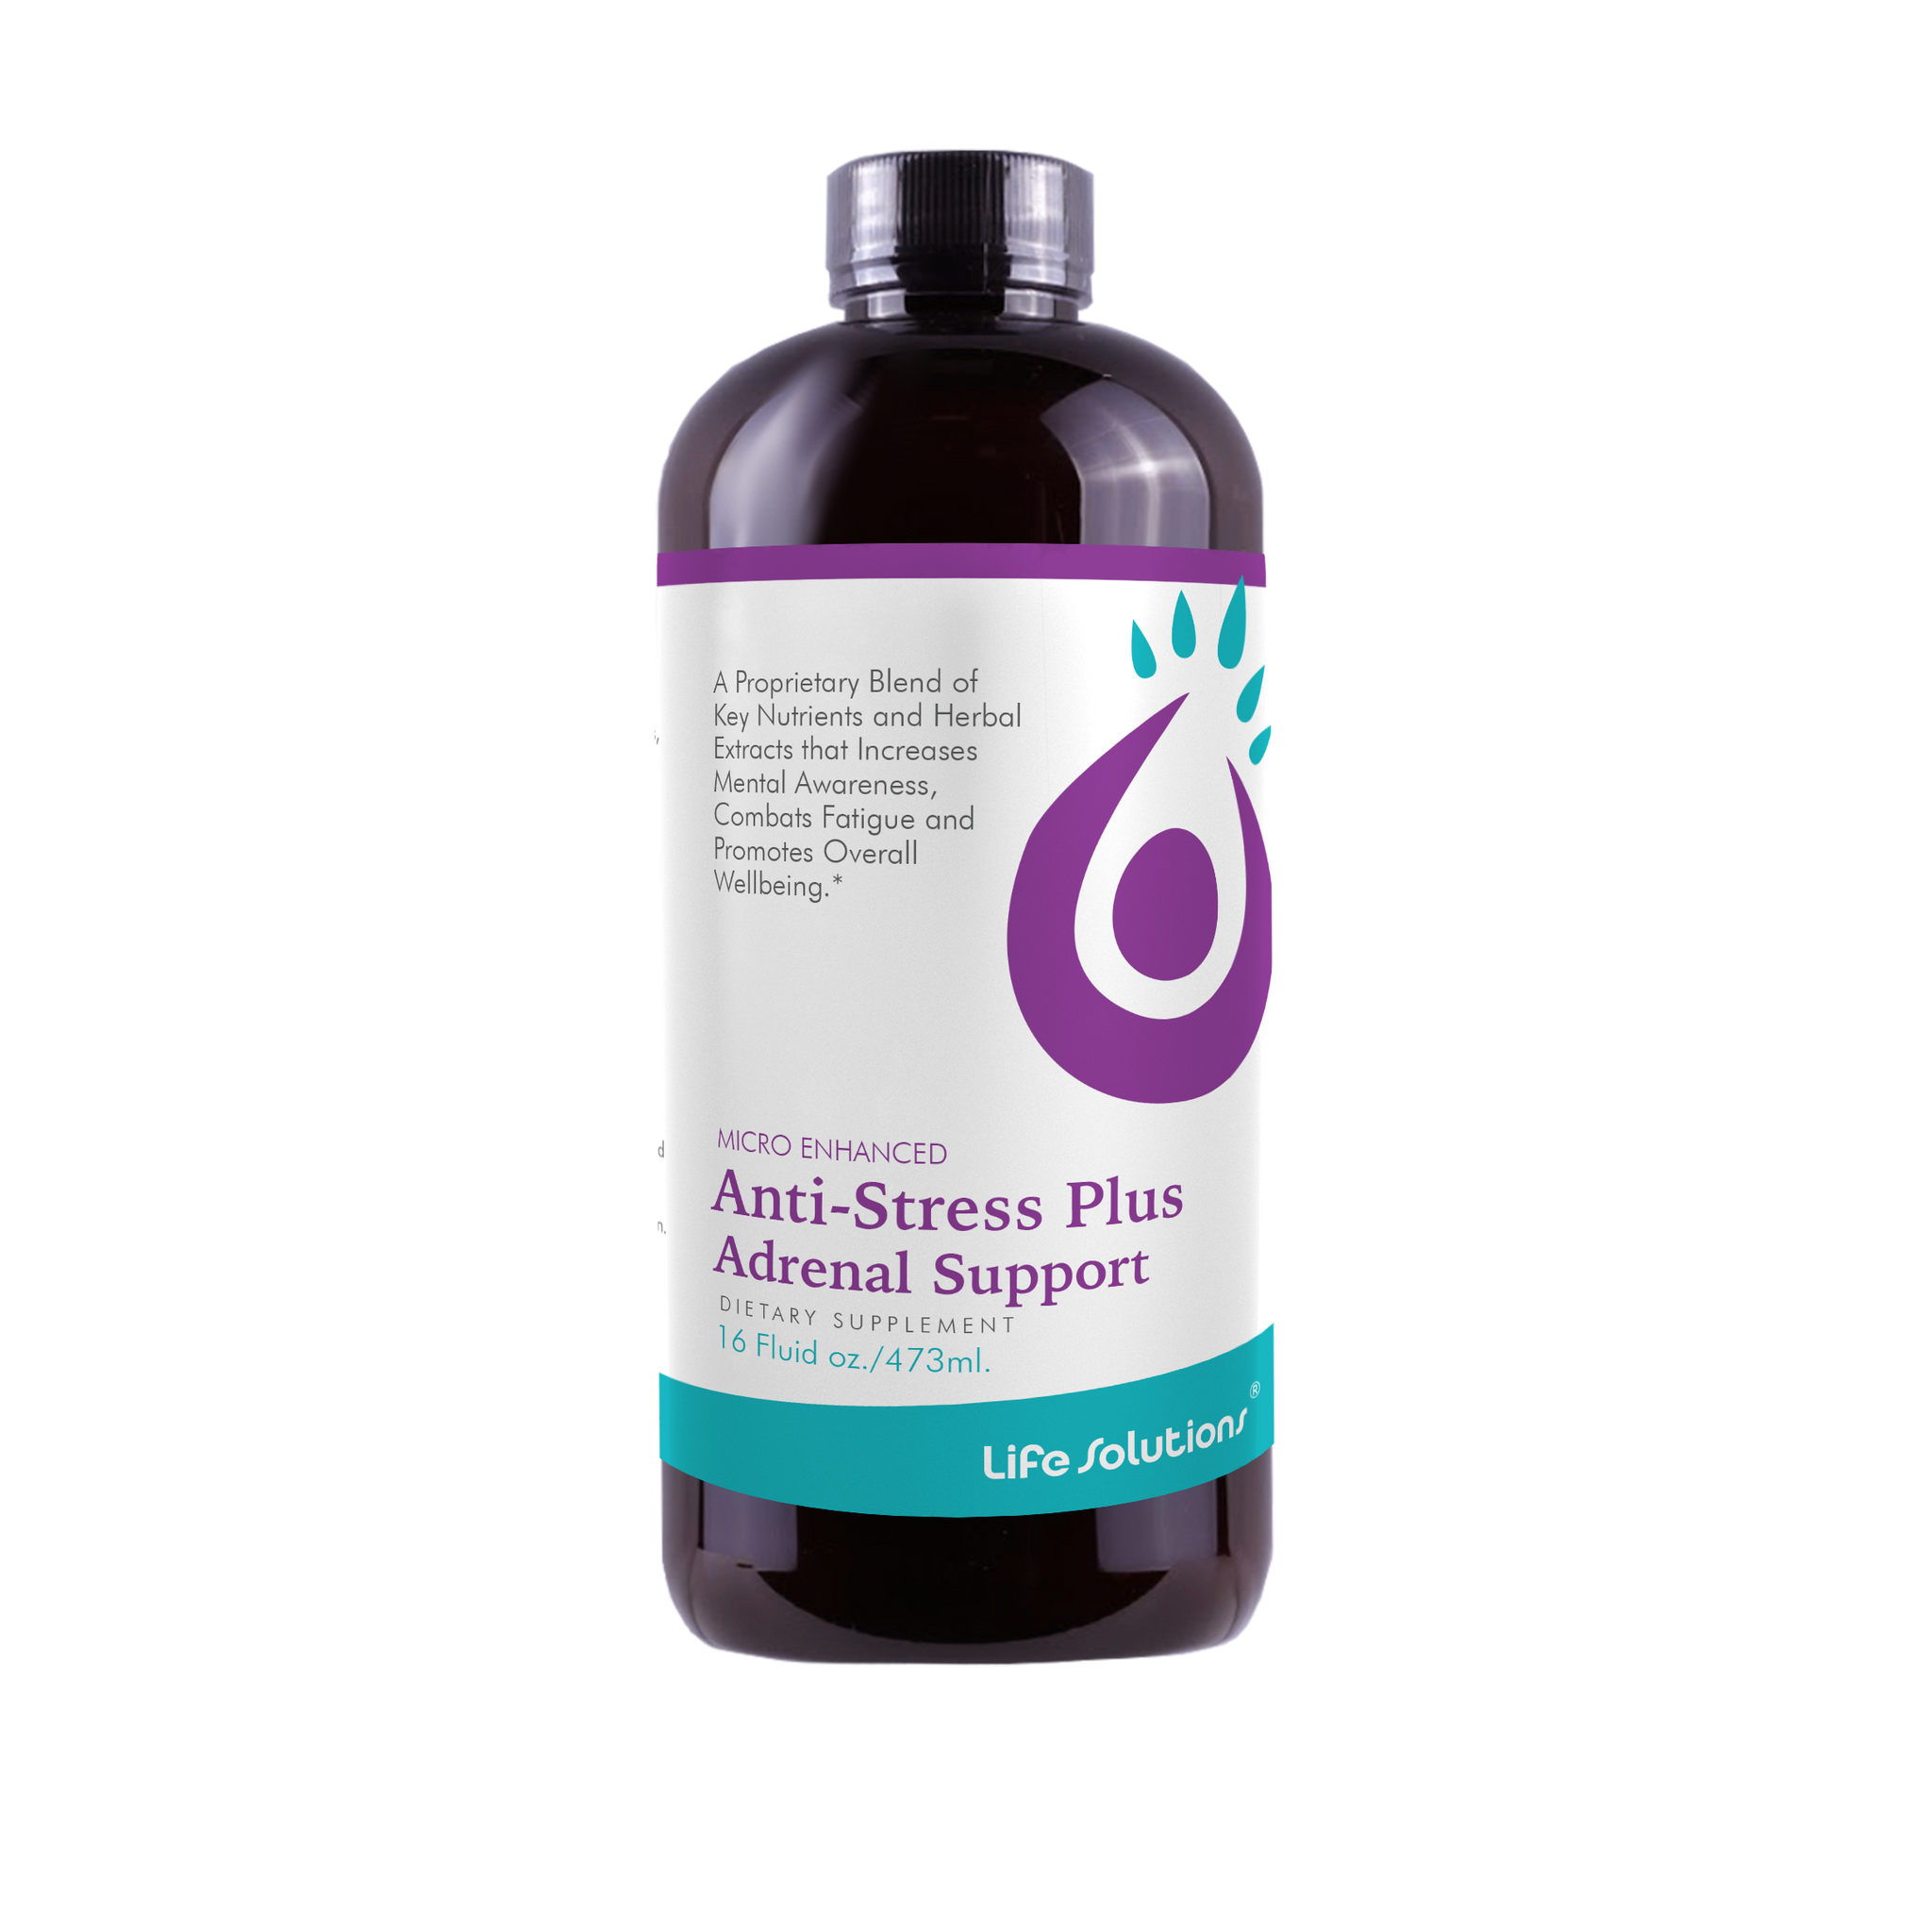 AntiStress Plus Adrenal Support